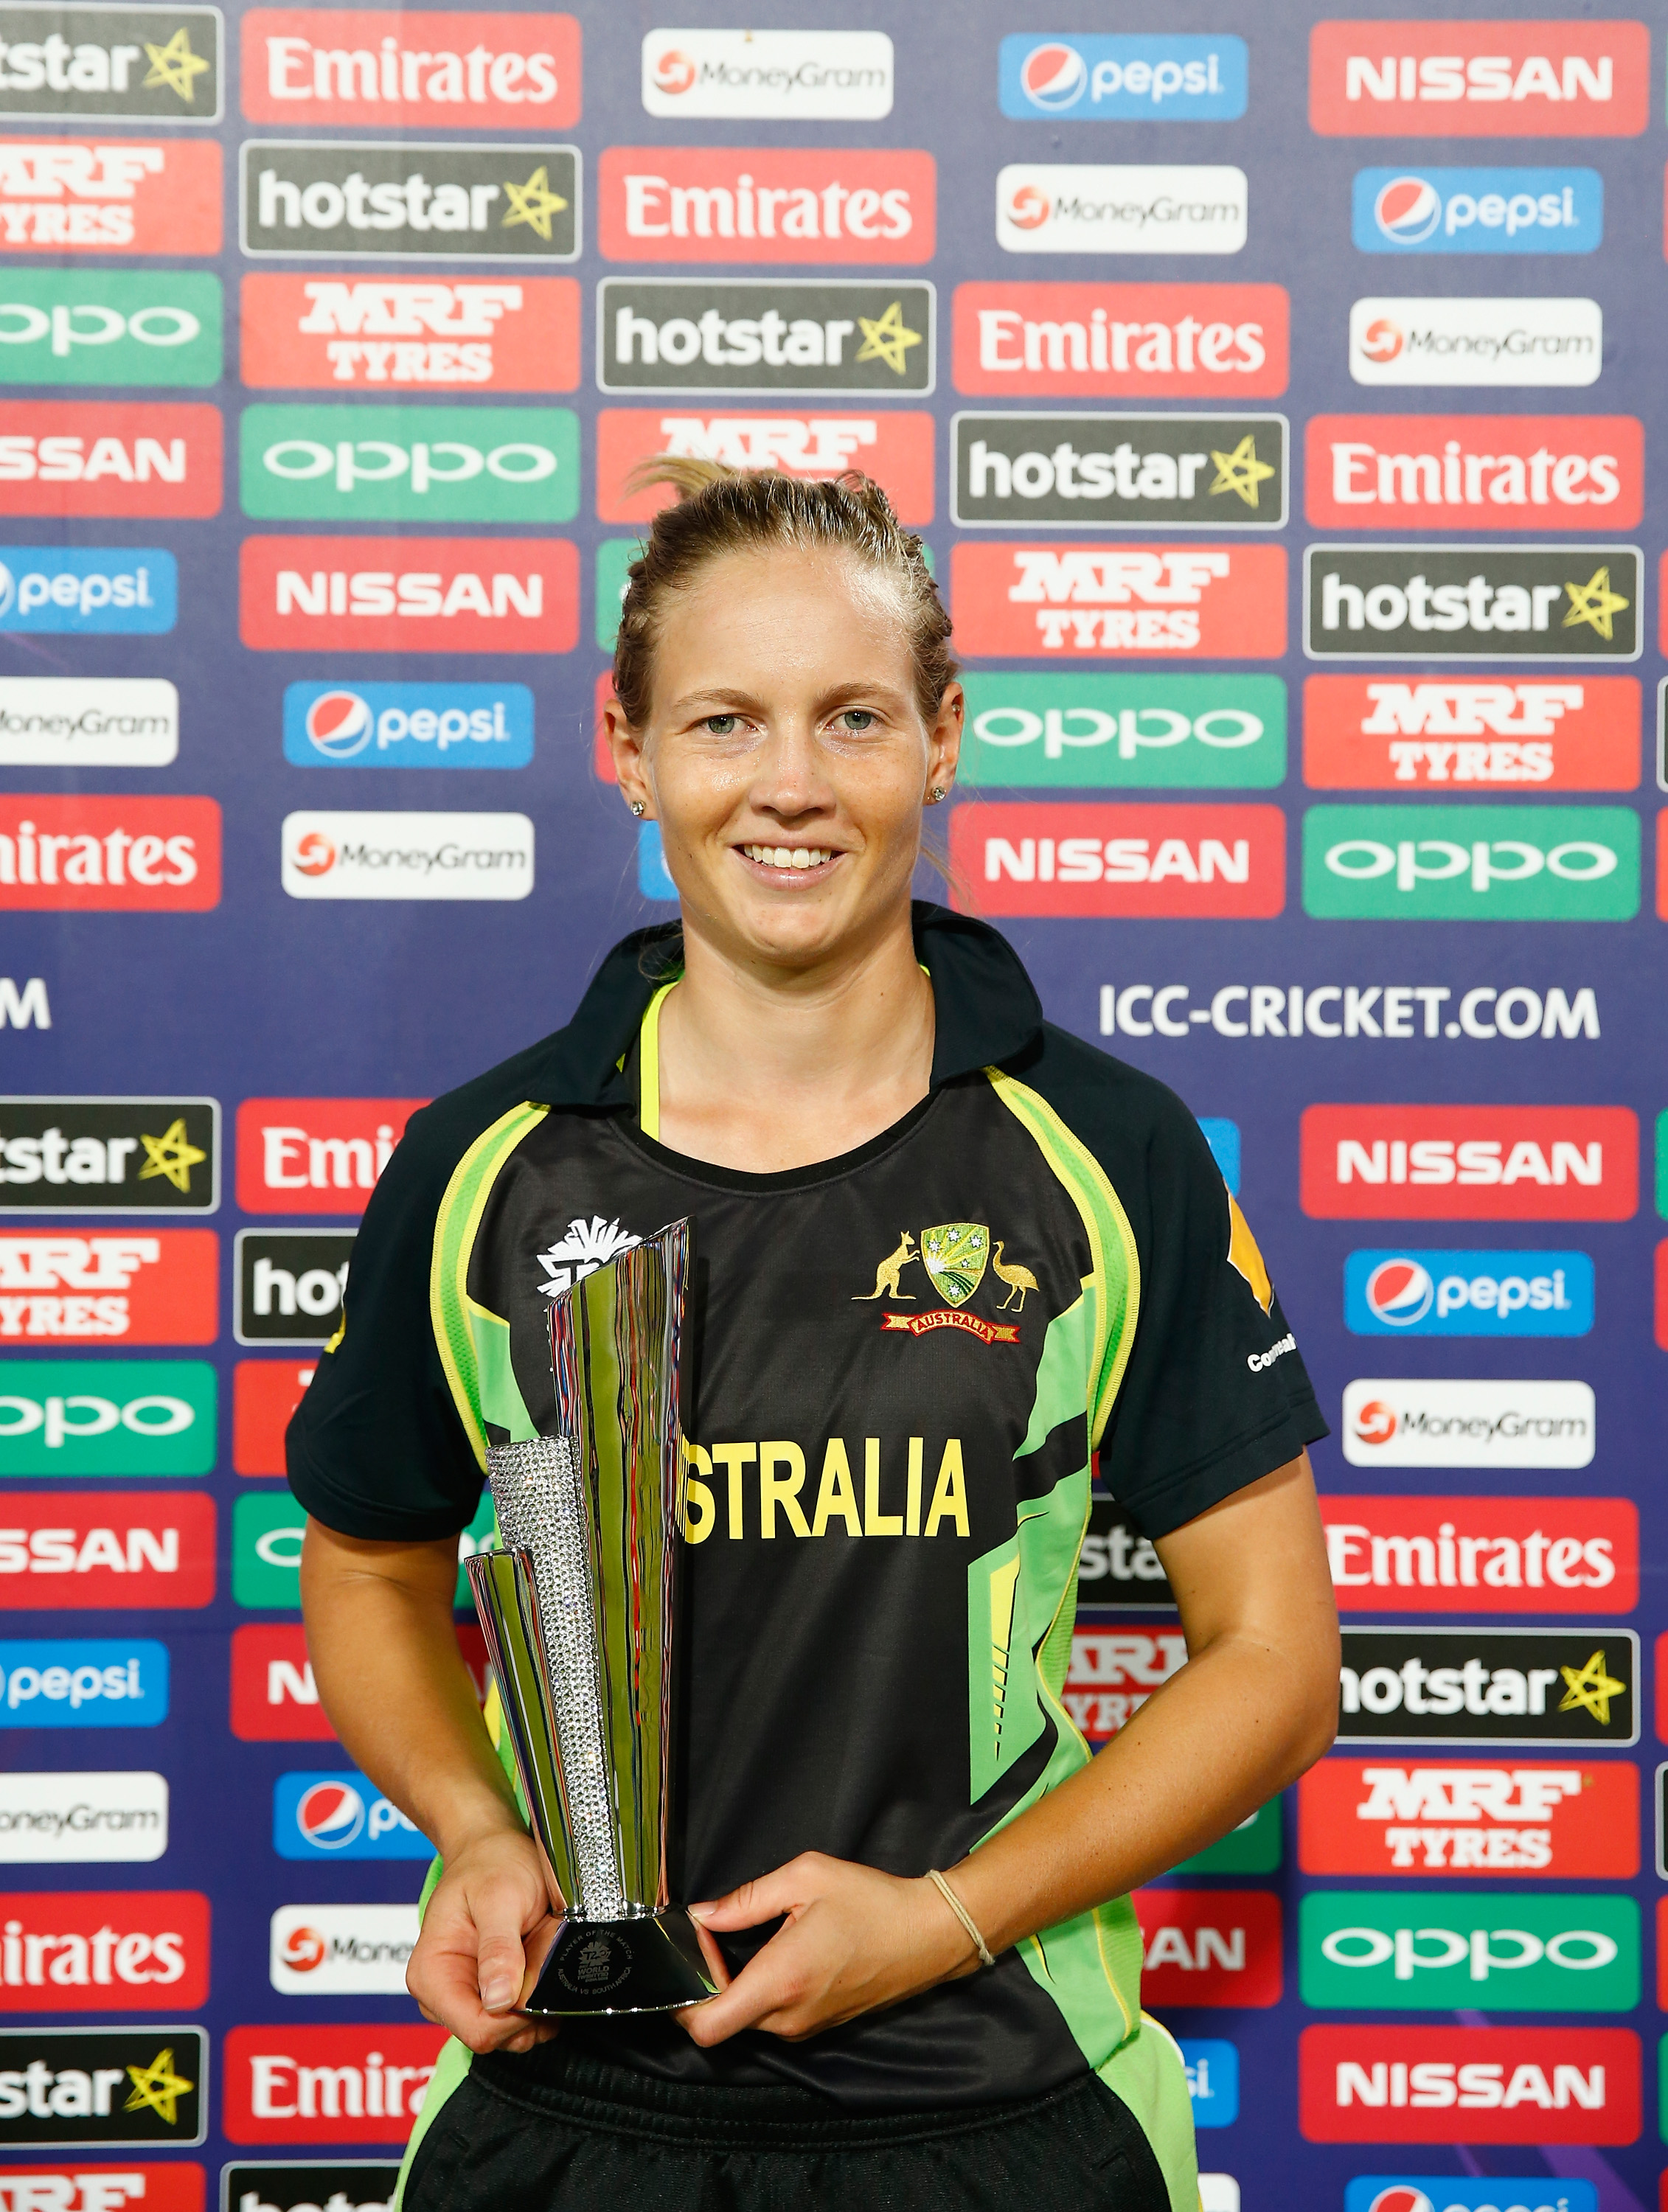 "NAGPUR, INDIA - MARCH 18: Meg Lanning, Captain of Australia poses for the camera with her Player of the Match award during the Women's ICC World Twenty20 India 2016 Group A match between Australia and South Africa at the Vidarbha Cricket Association Stadium on March 18, 2016 in Nagpur, India. (Photo by Christopher Lee-IDI/IDI via Getty Images)"